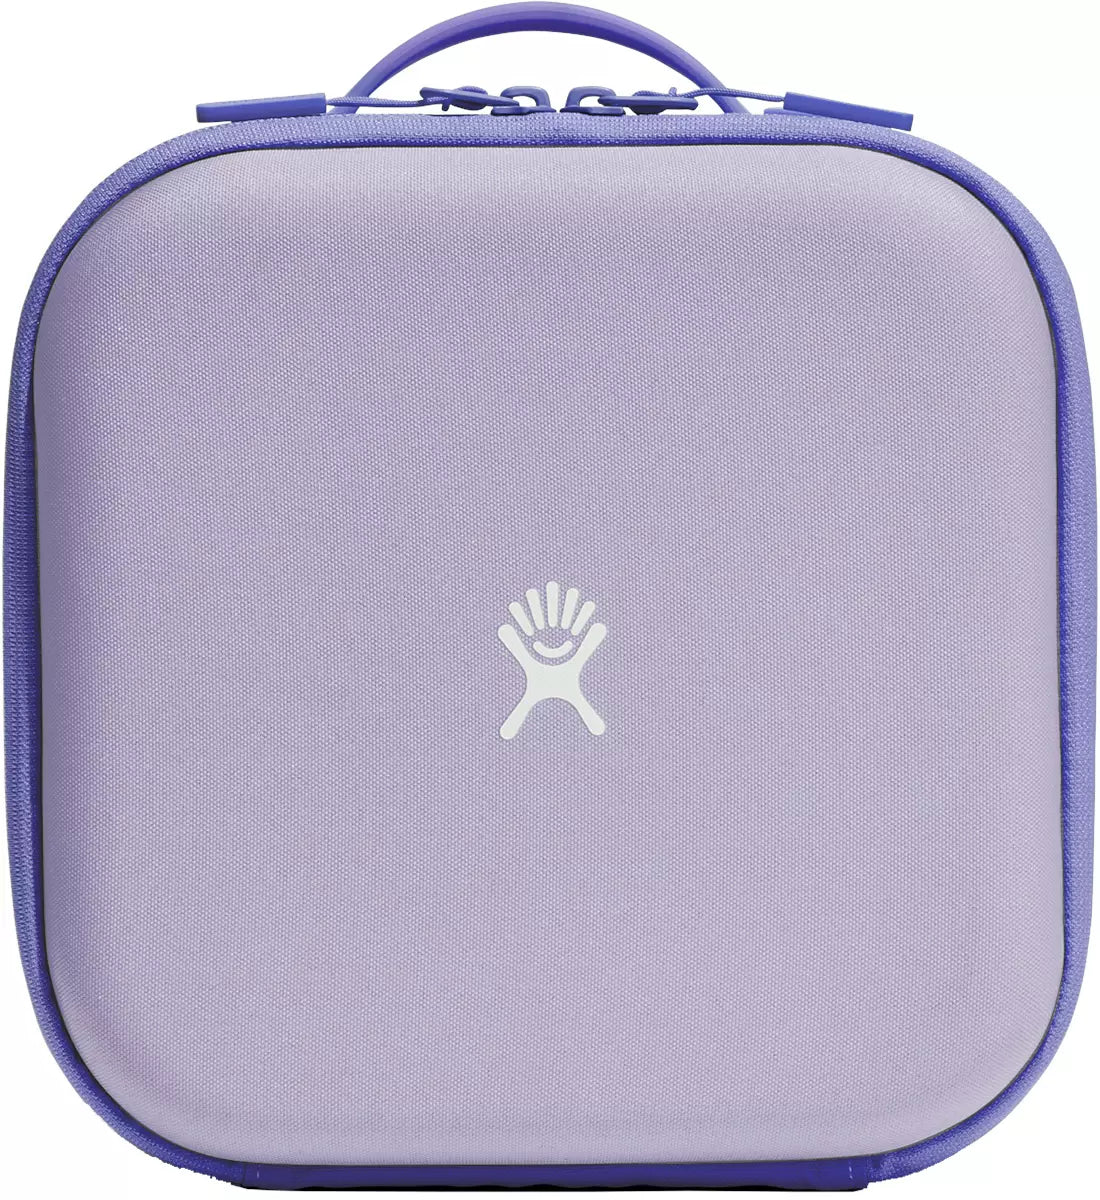 Kids Small Lunch Box